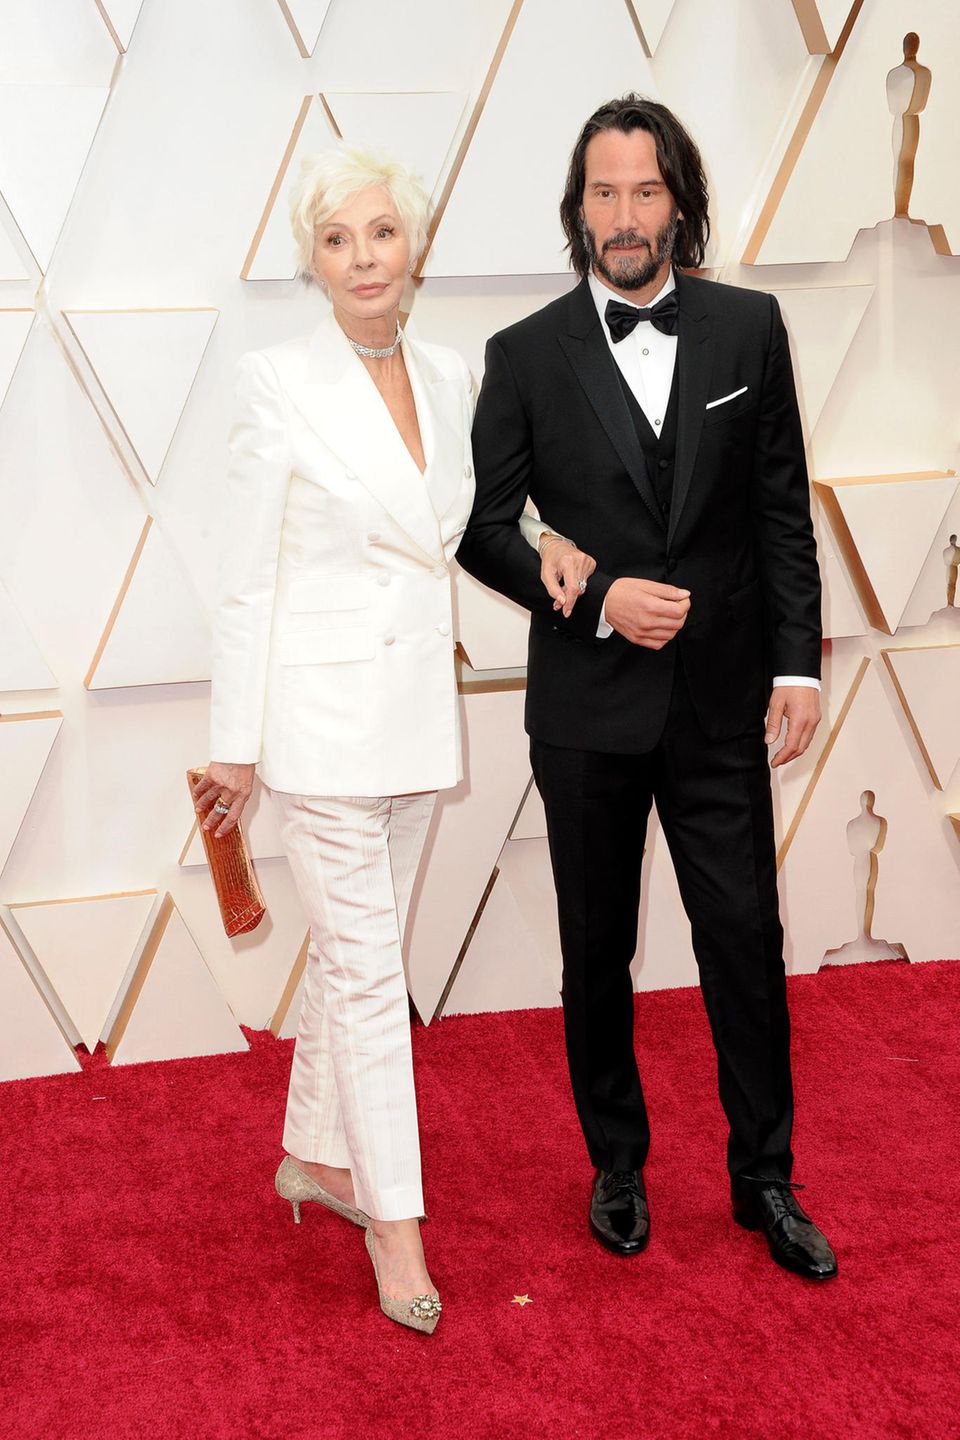 Keanu Reeves with mother Patricia Taylor at the 2020 Academy Awards.